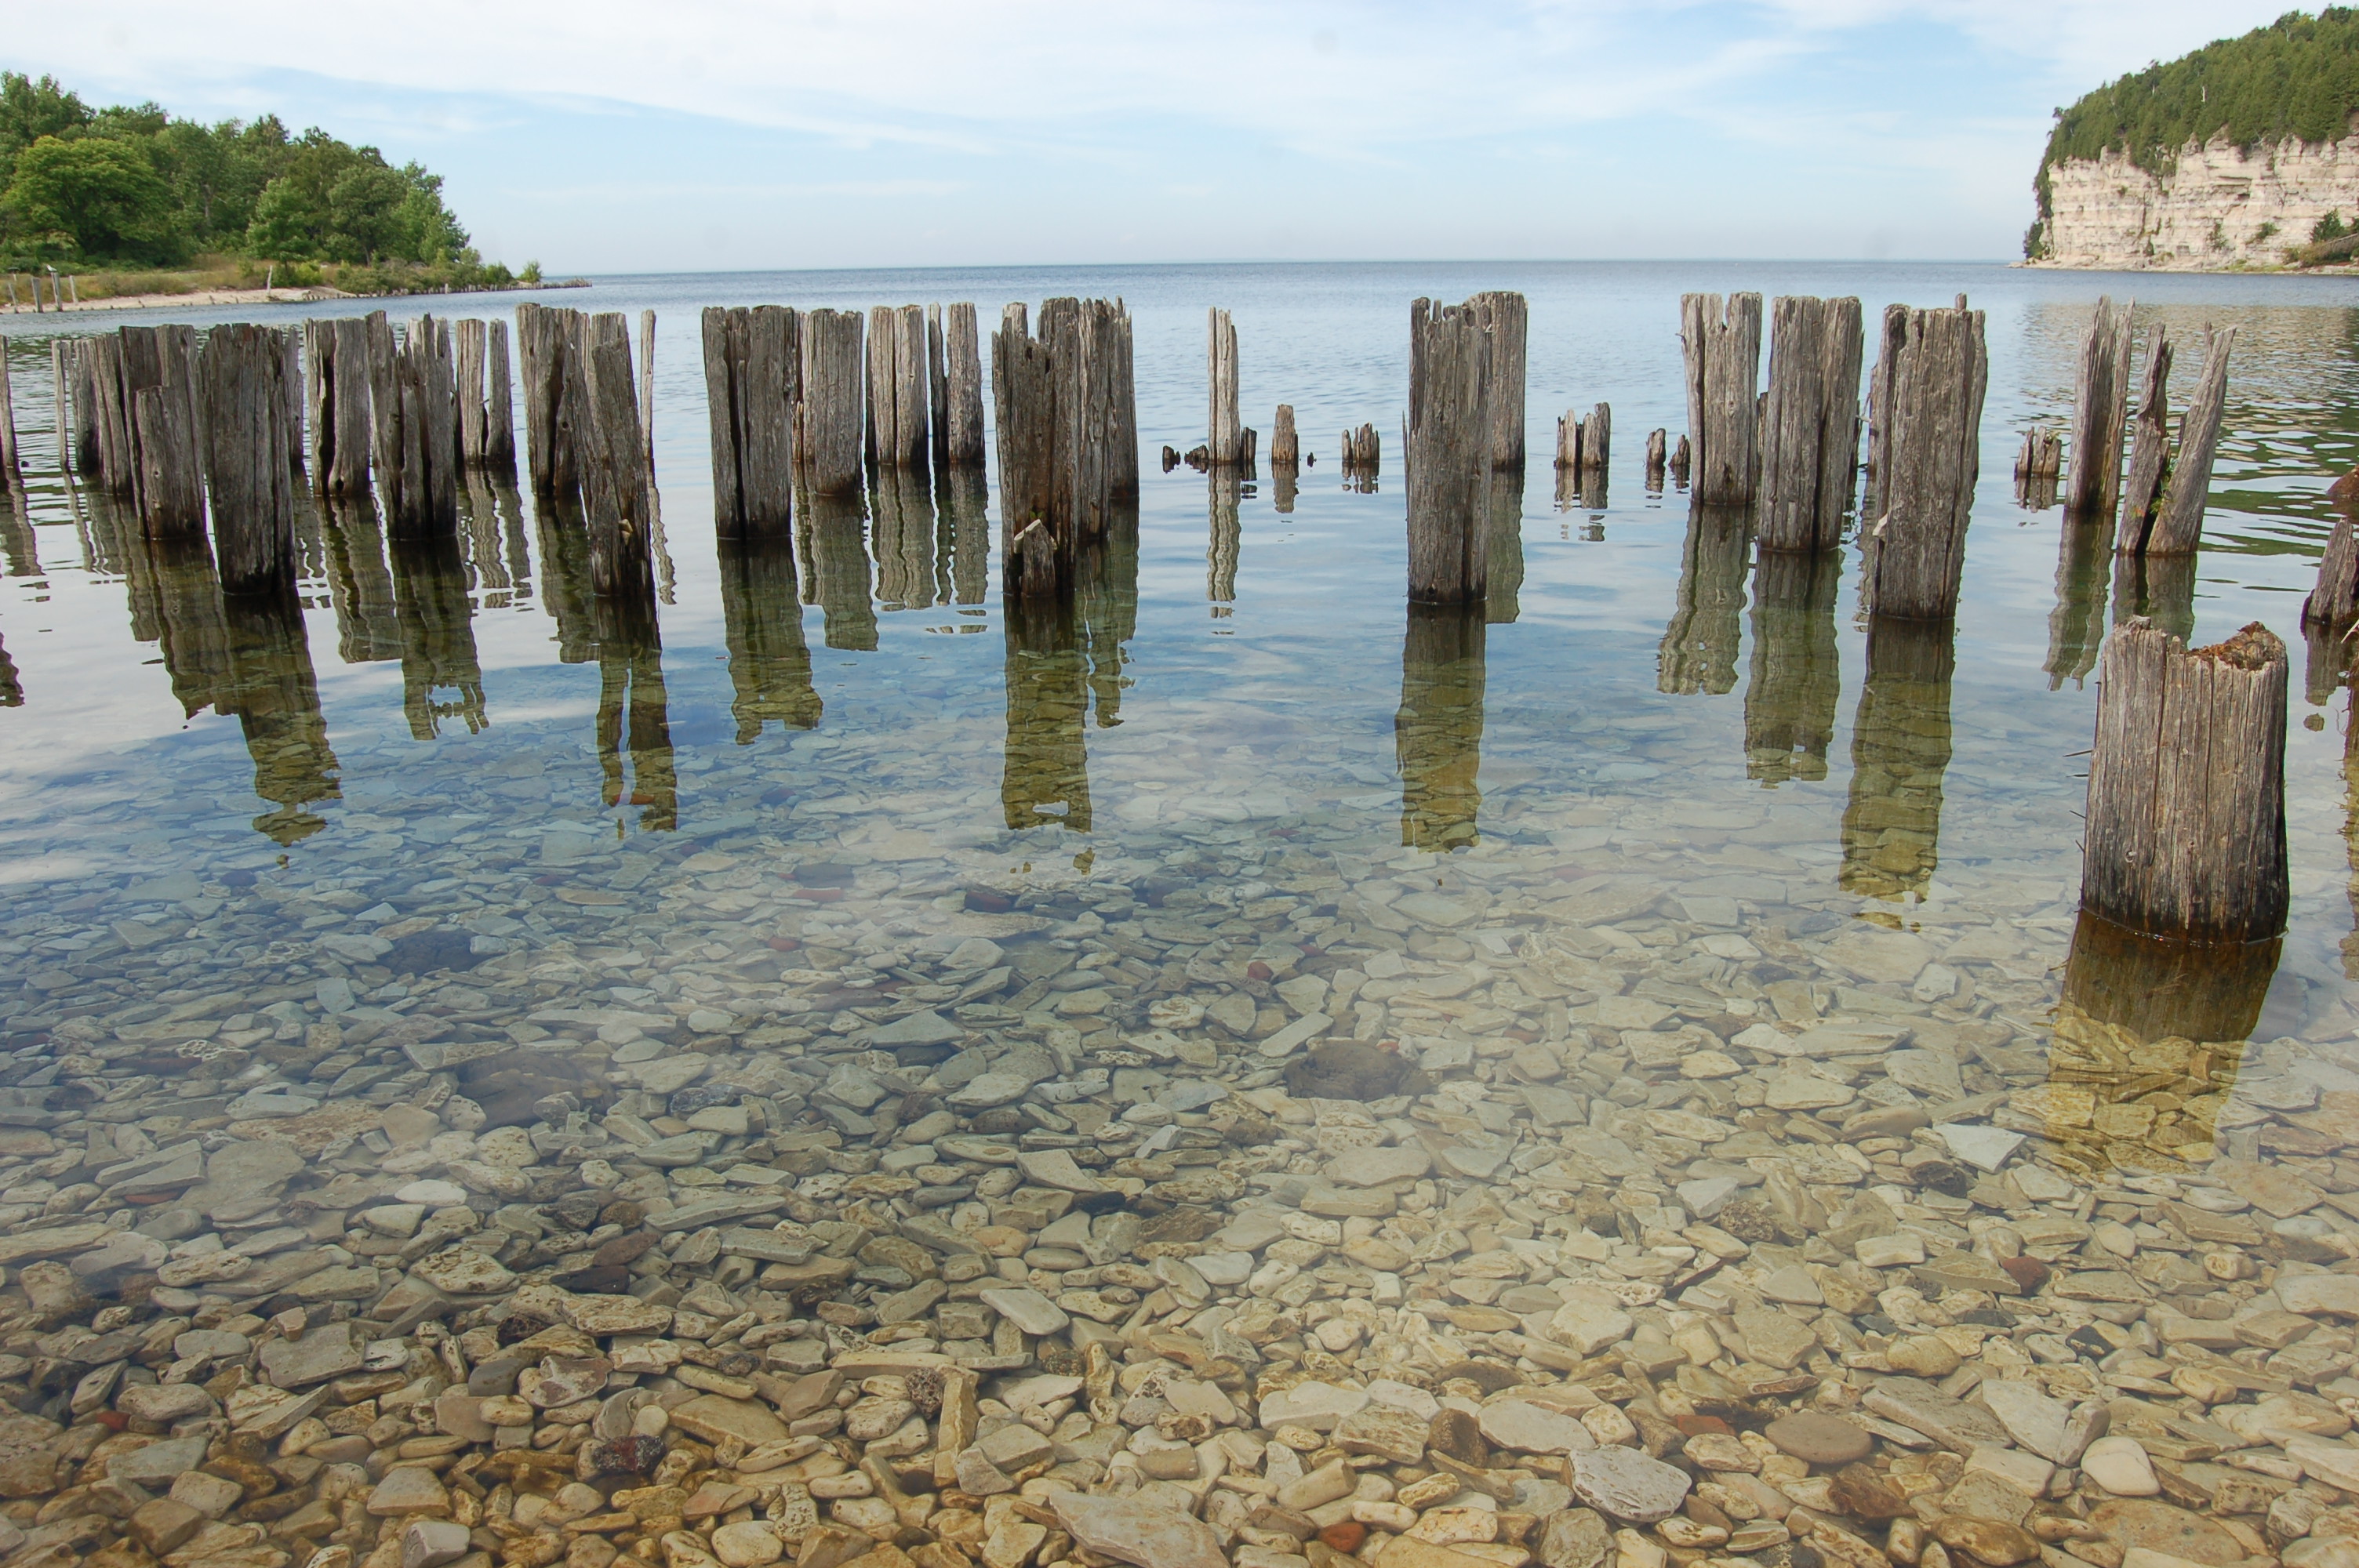 Old dock pilings add to the scenic shoreline